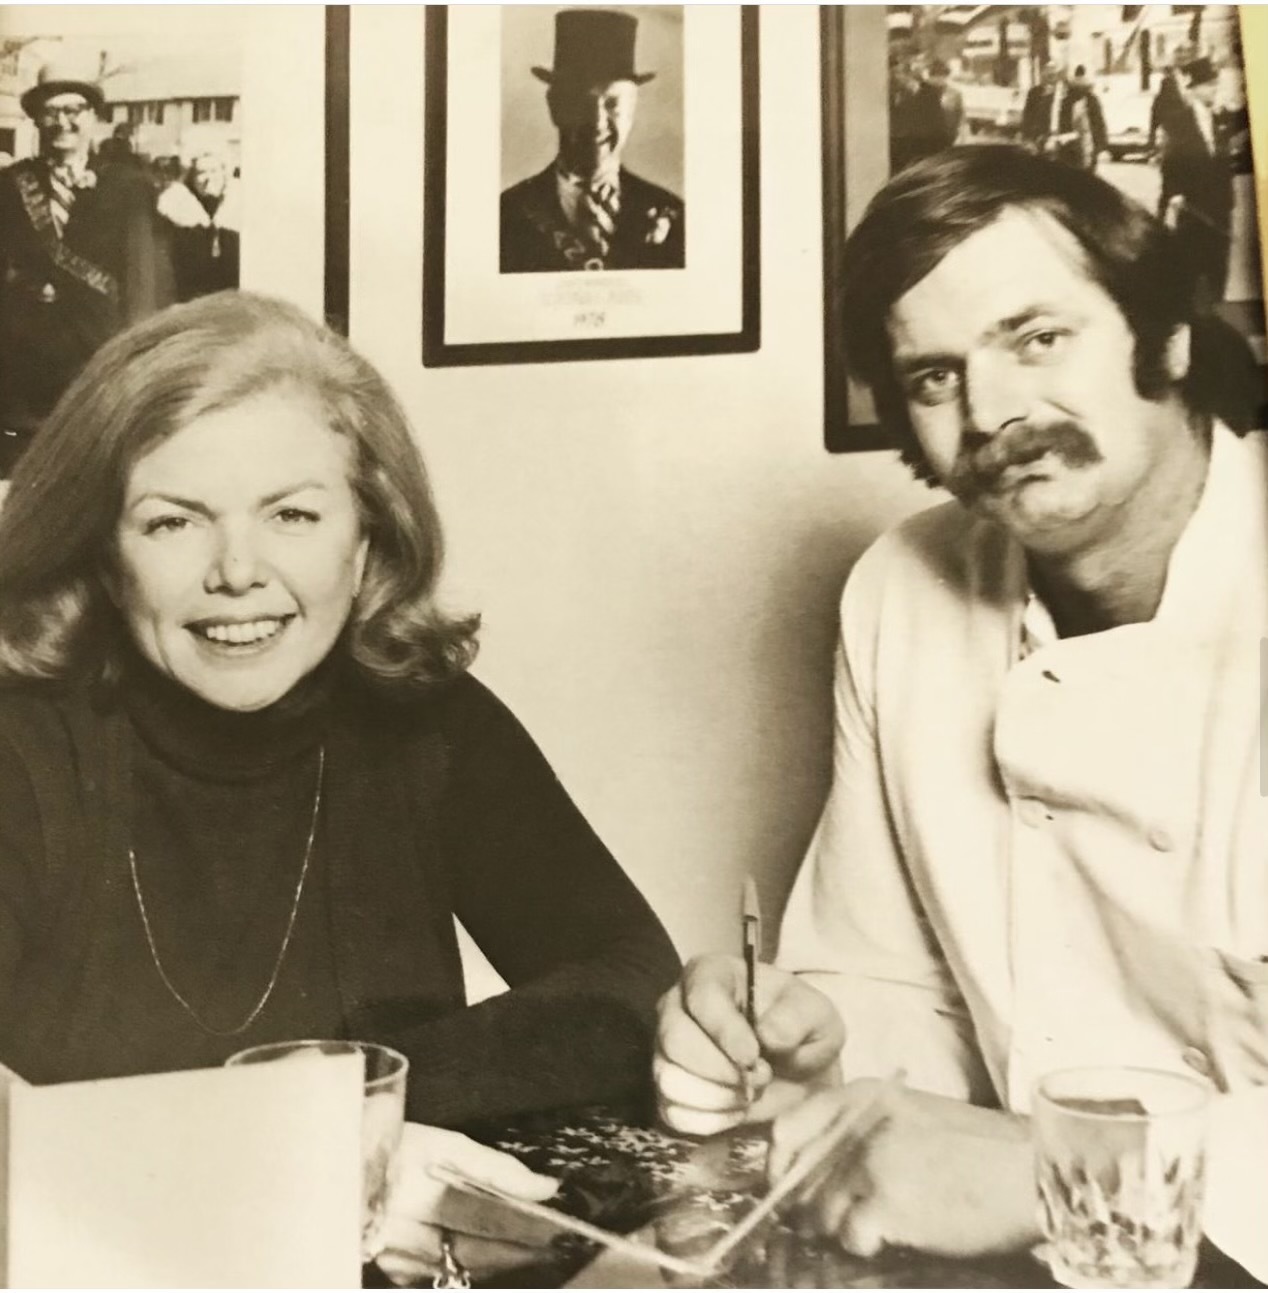 Starr Boggs and Susie McAllister at The Patio restaurant, which they opened together in 1982.